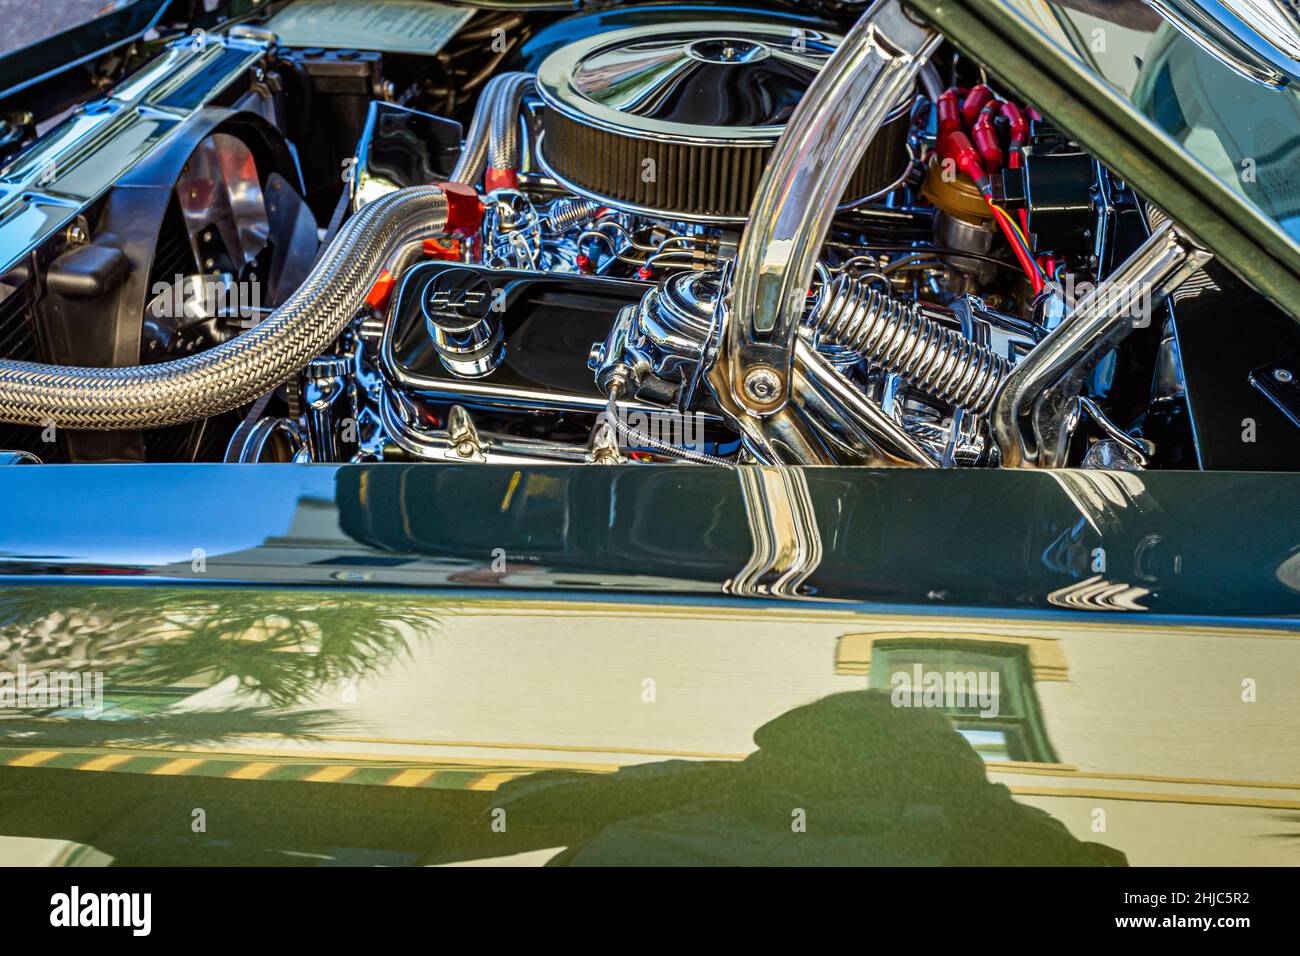 Fernandina Beach, FL - October 18, 2014: Detailed engine view of a 1969 Chevrolet Chevelle SS 396 Coupe at a classic car show in Fernandina Beach, Flo Stock Photo